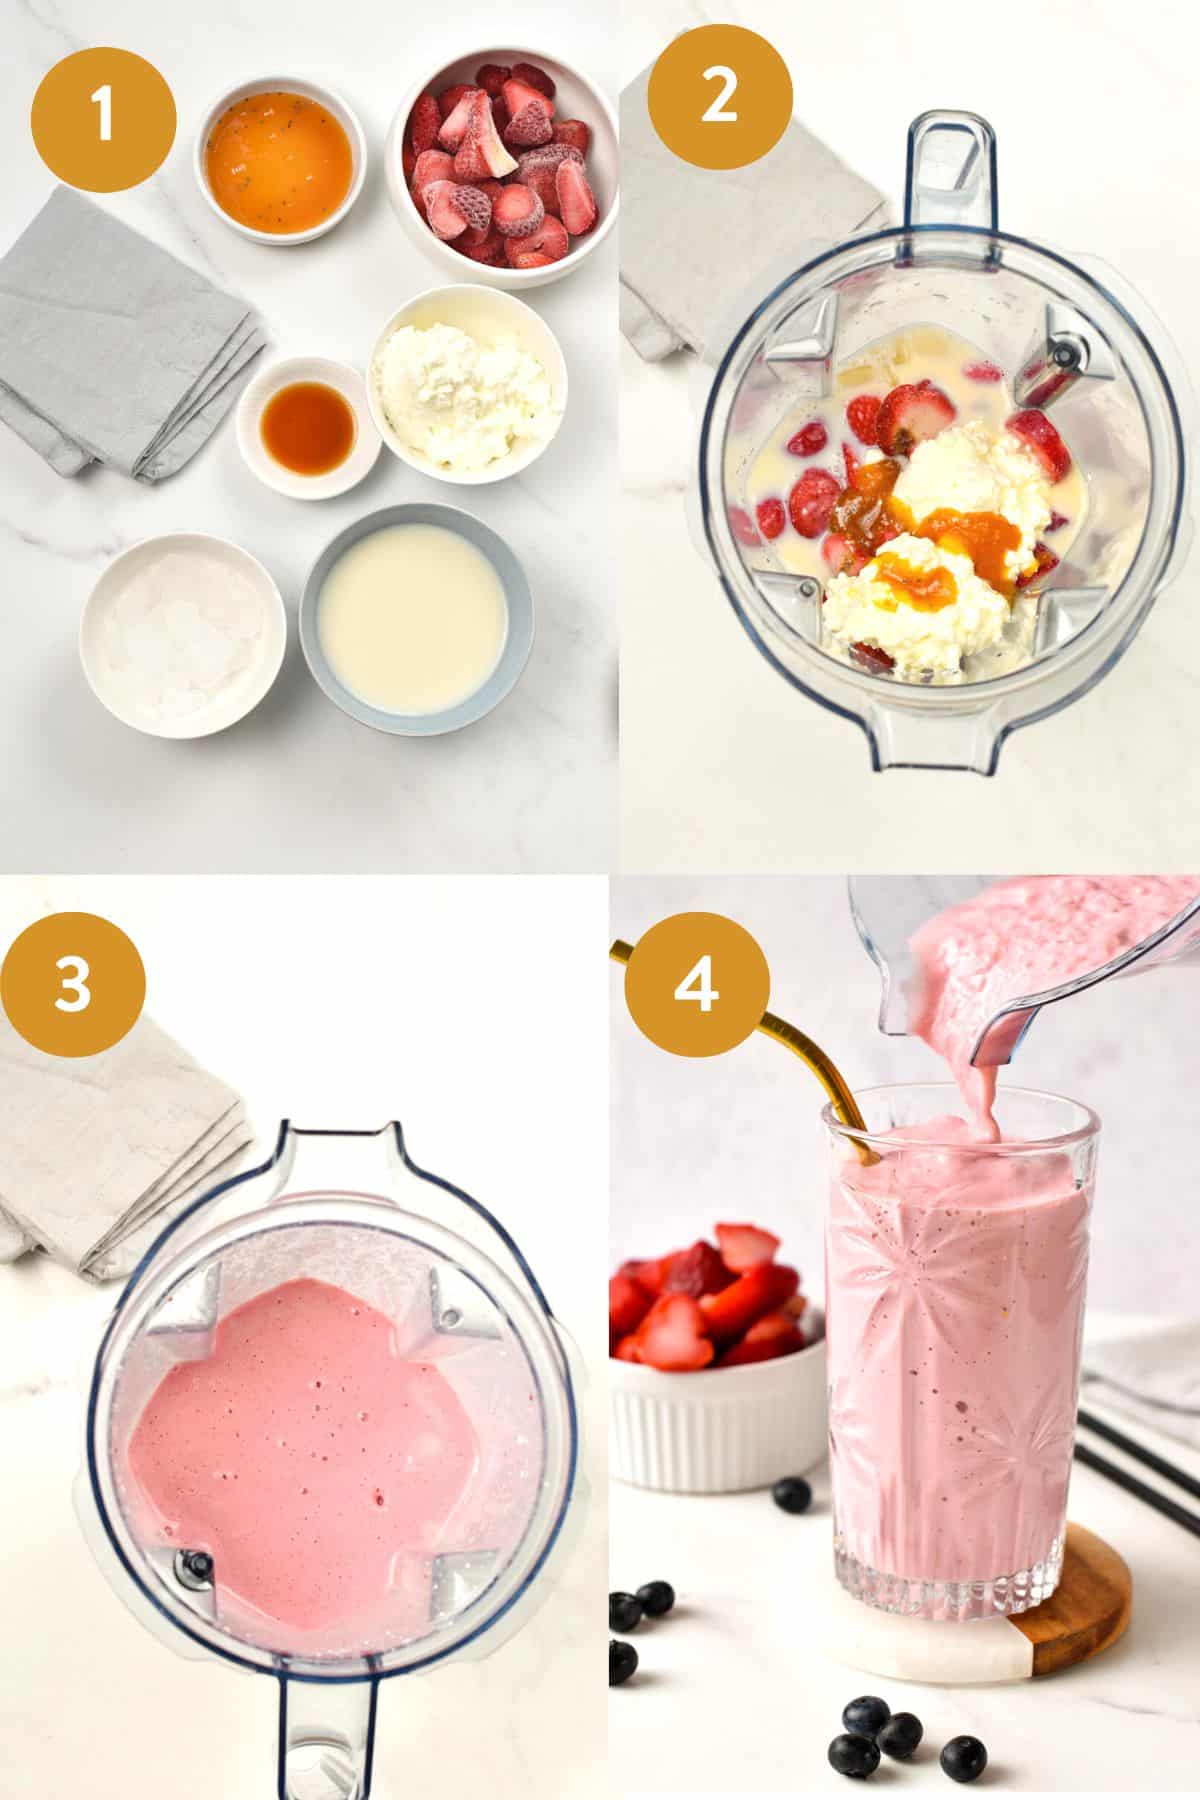 This Cottage Cheese Smoothie is a deliciously thick and creamy high-protein strawberry smoothie made from cottage cheese. With 14 grams of proteins, this is the perfect post work out snack.